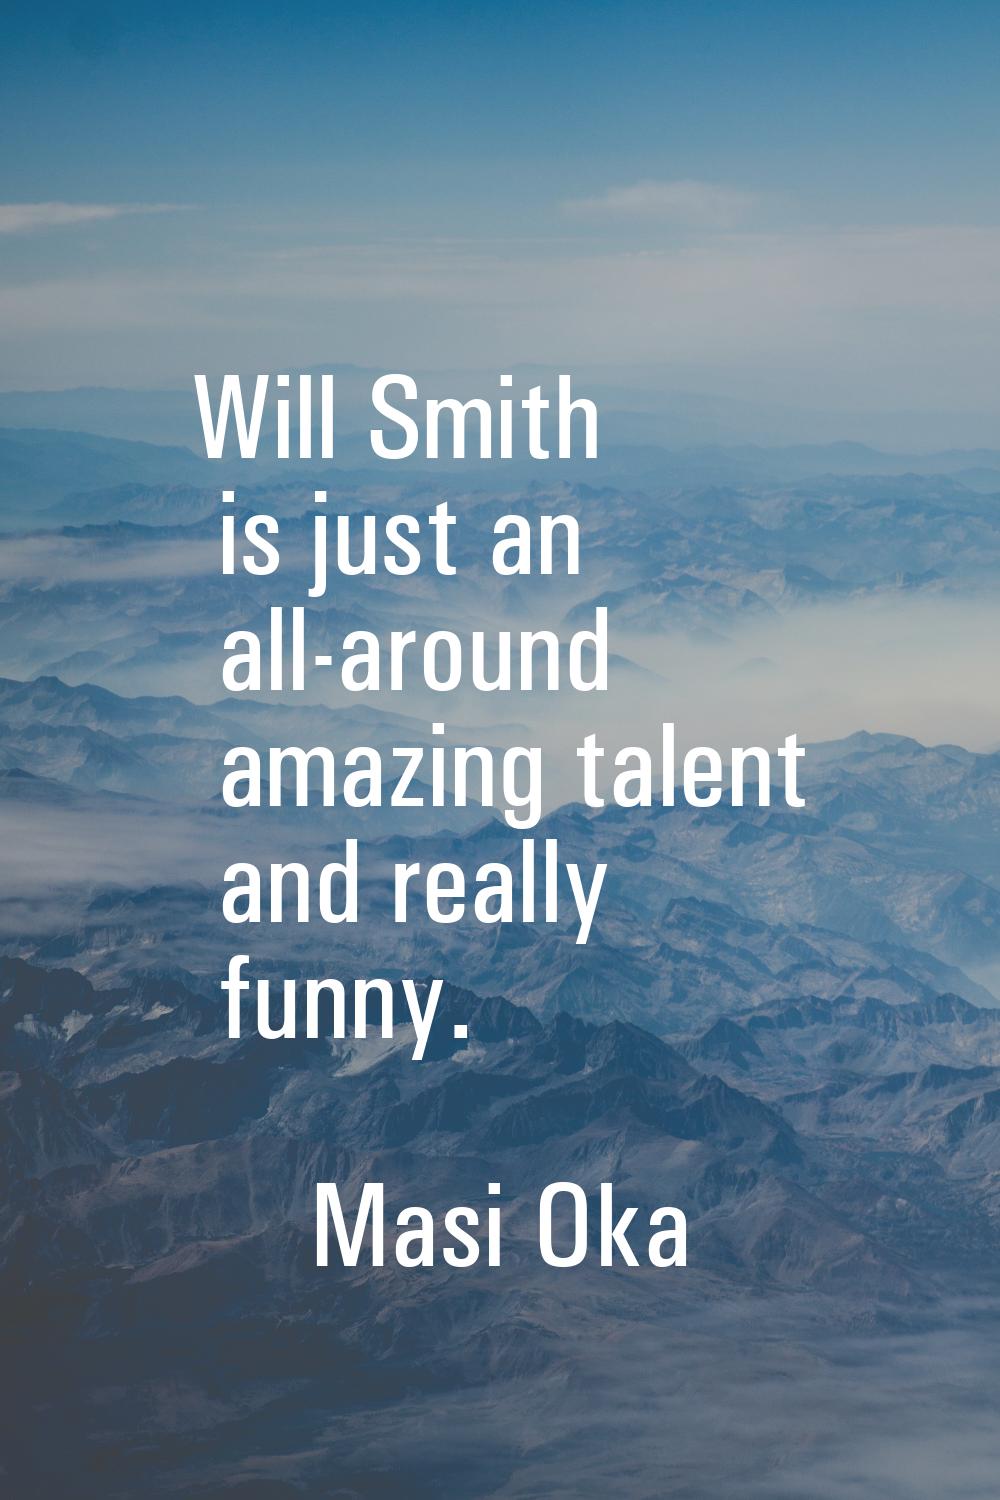 Will Smith is just an all-around amazing talent and really funny.